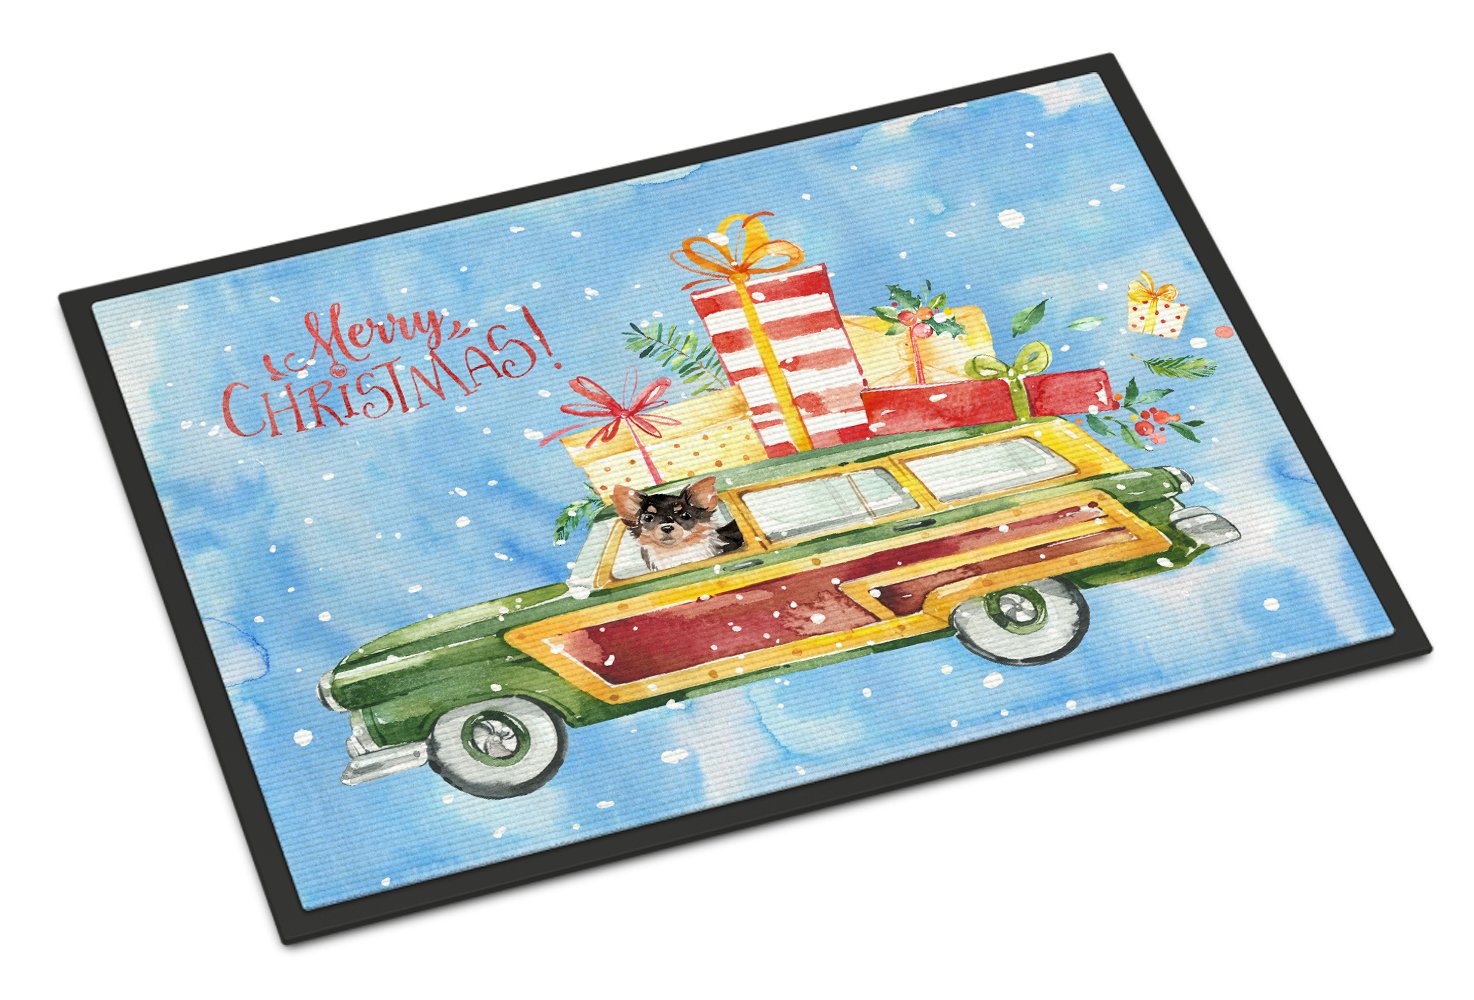 Merry Christmas Long Haired Chihuahua Indoor or Outdoor Mat 24x36 CK2460JMAT by Caroline's Treasures